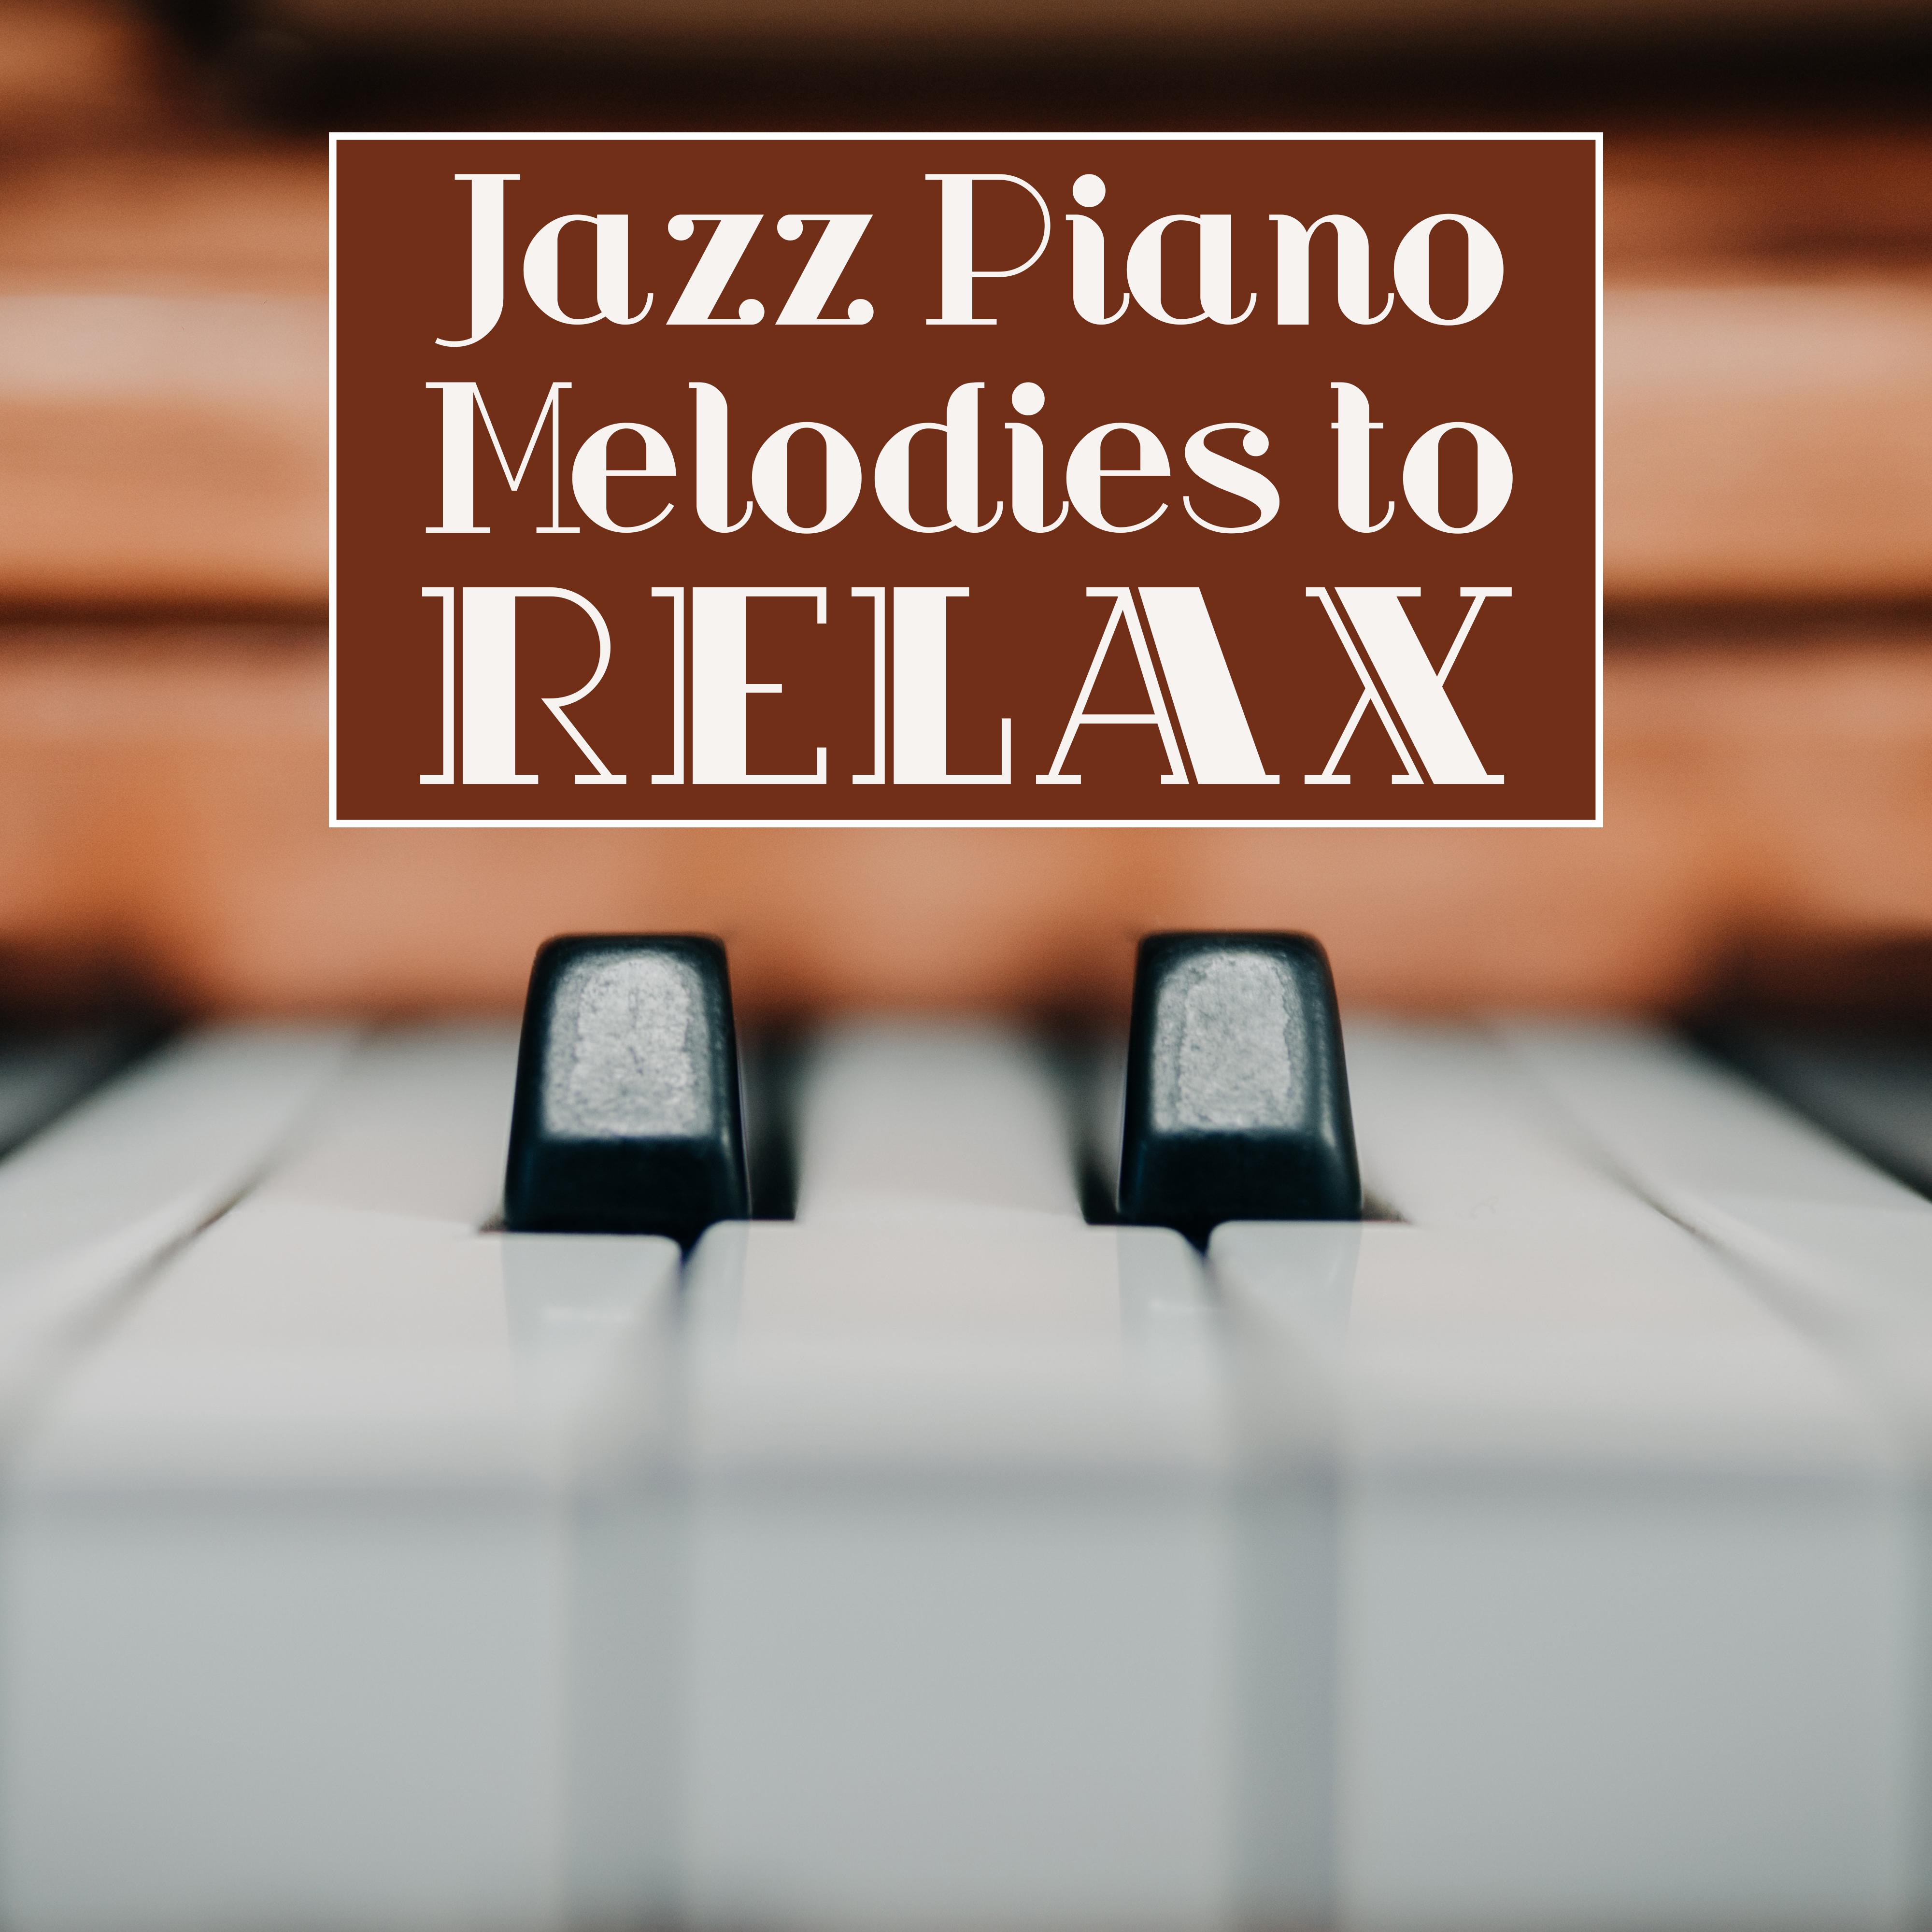 Jazz Piano Melodies to Relax